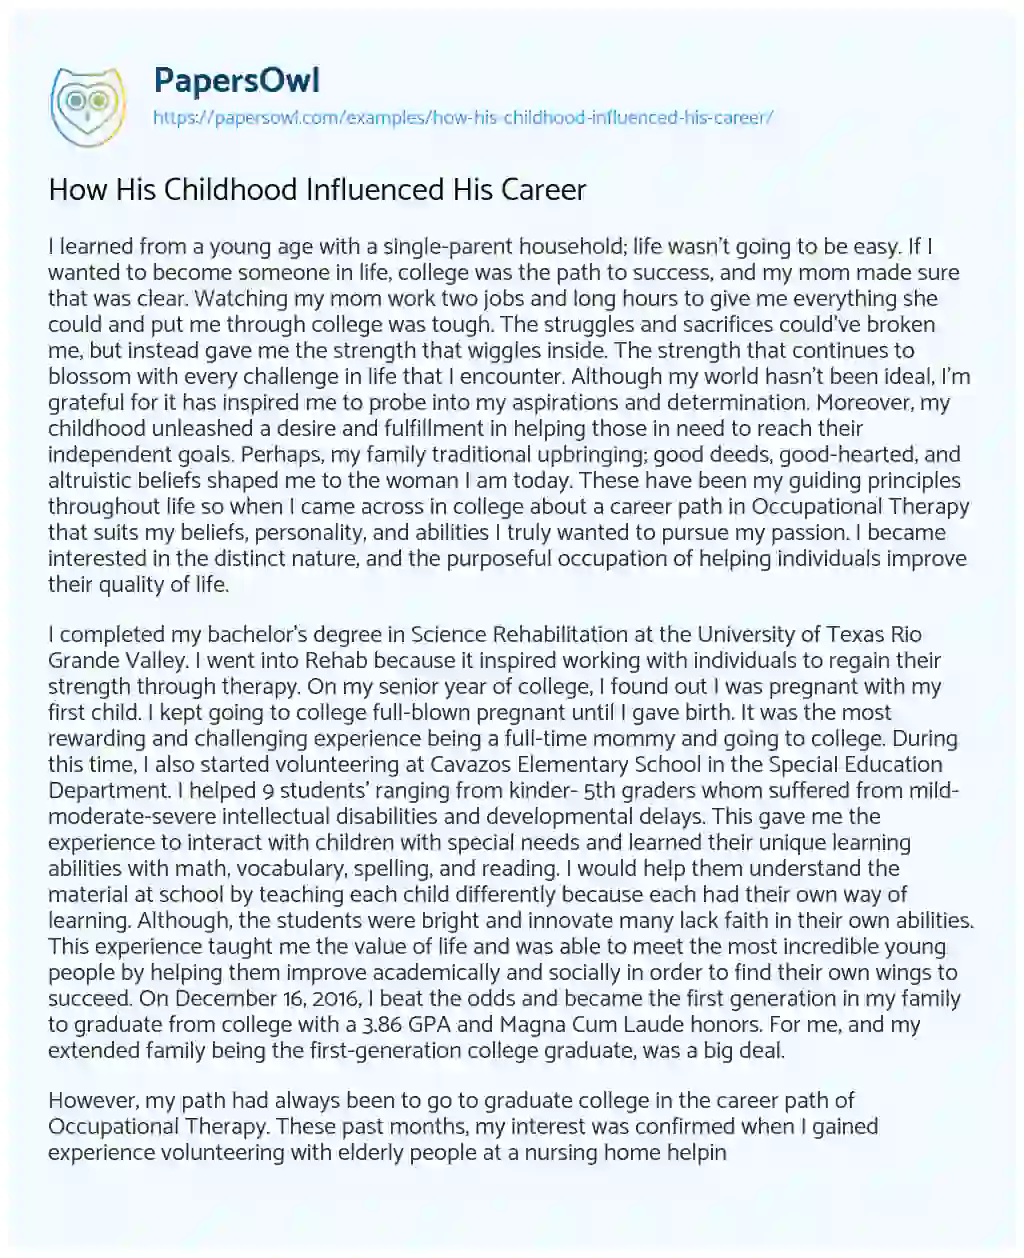 Essay on How his Childhood Influenced his Career